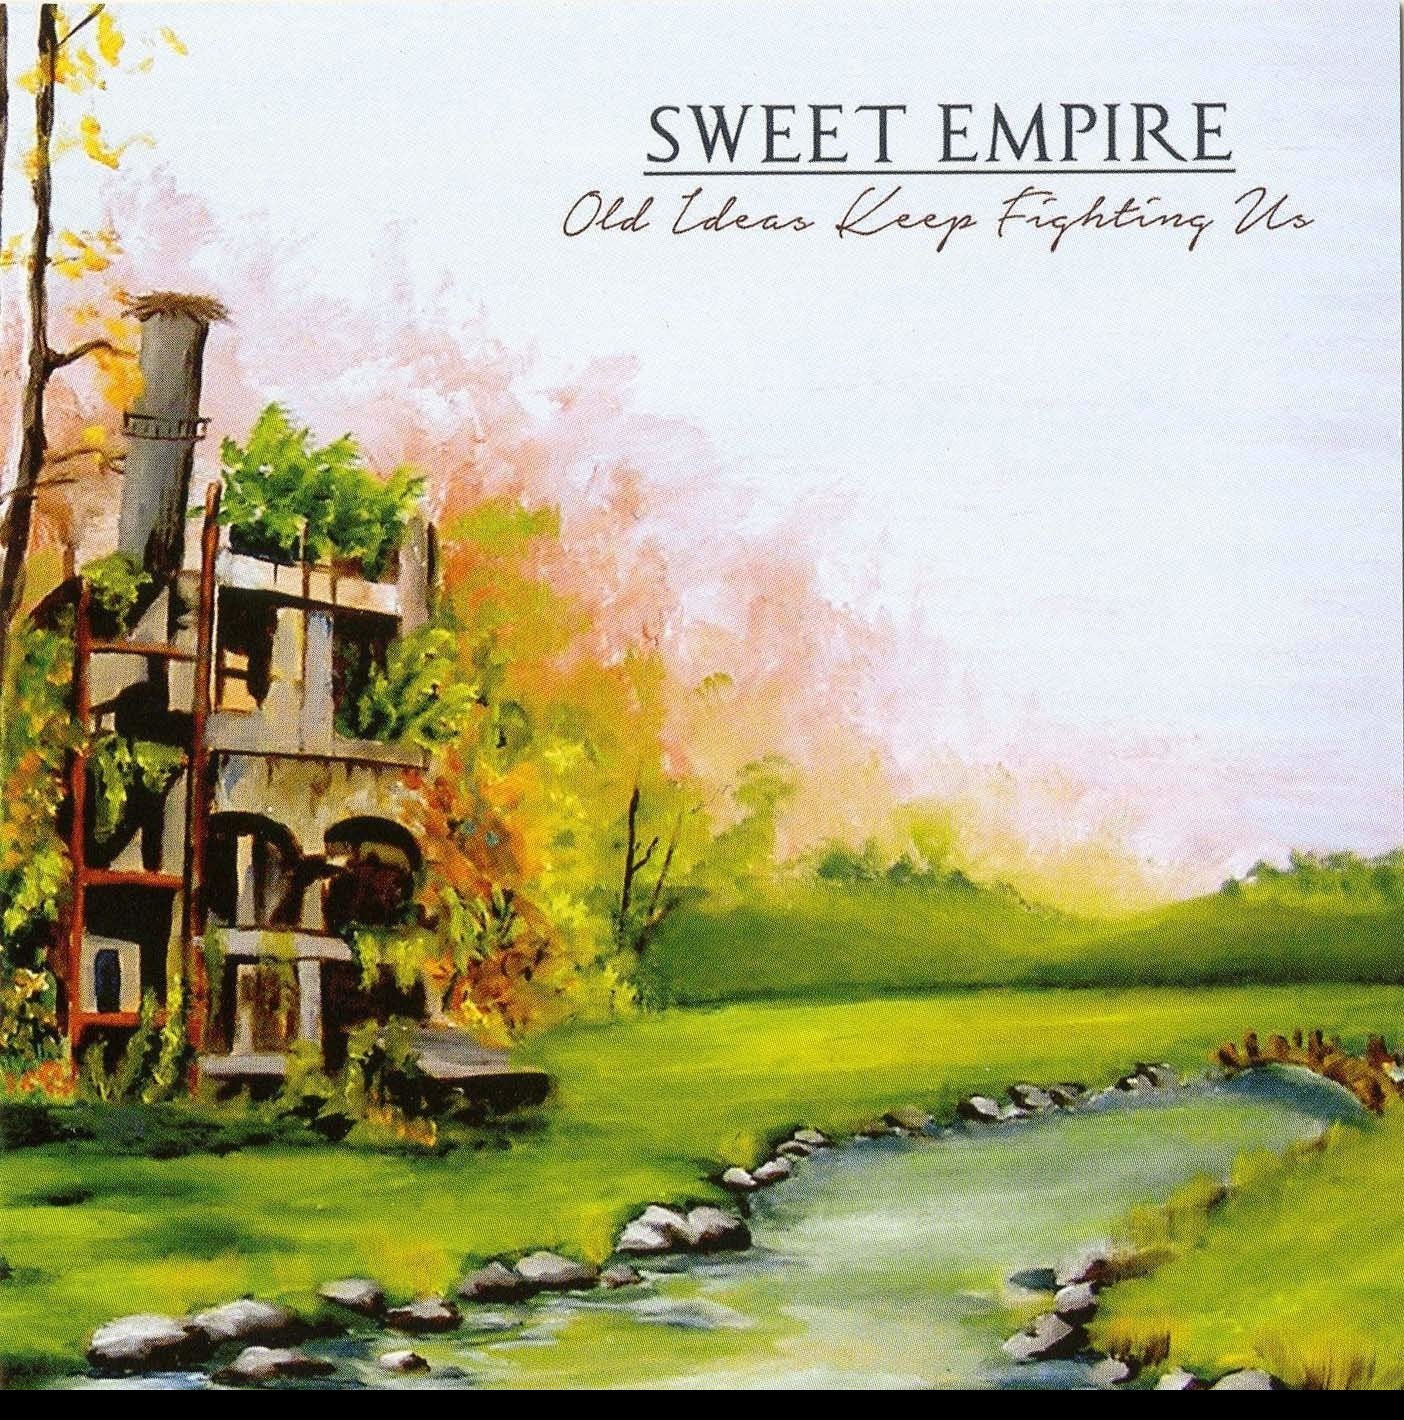 CD Shop - SWEET EMPIRE OLD IDEAS KEEP FIGHTING US